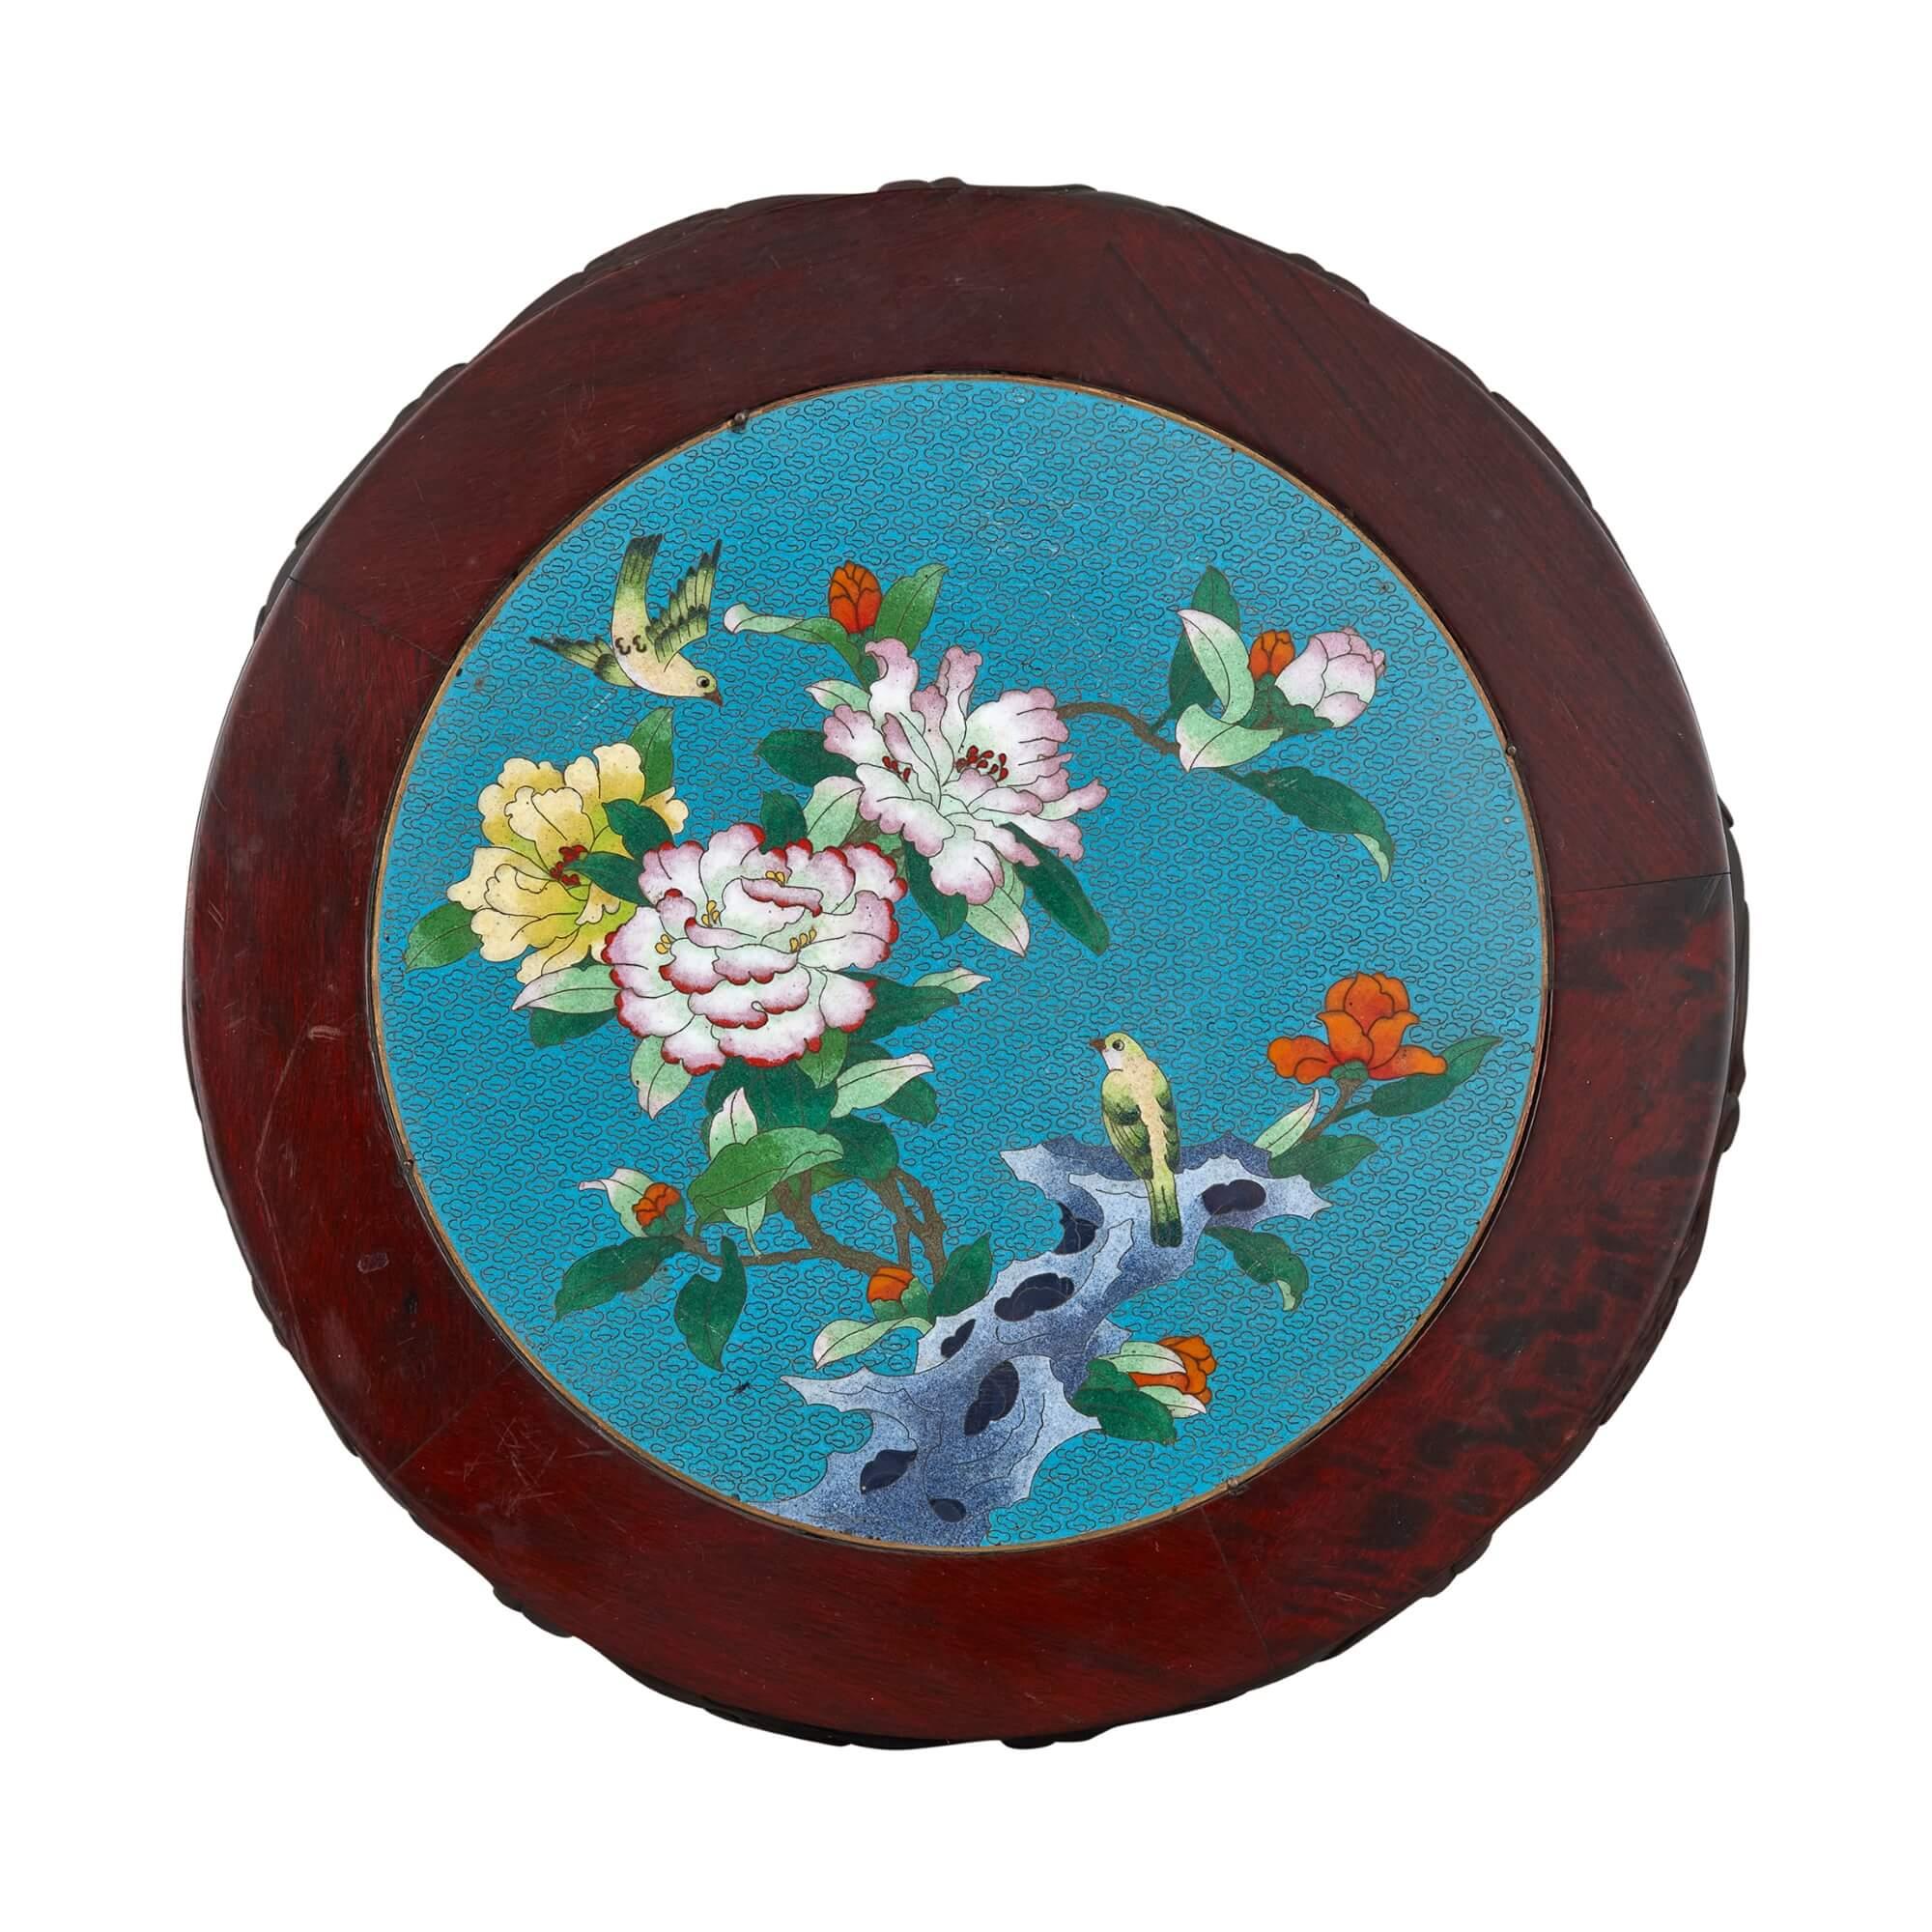 A Chinese cloisonné enamel inset circular carved hardwood pedestal
Chinese, early 20th century
Measures: Height 34cm, diameter 45cm

Made in China in the early twentieth century, this elegant yet humble piece is a carved hardwood stand, inlaid